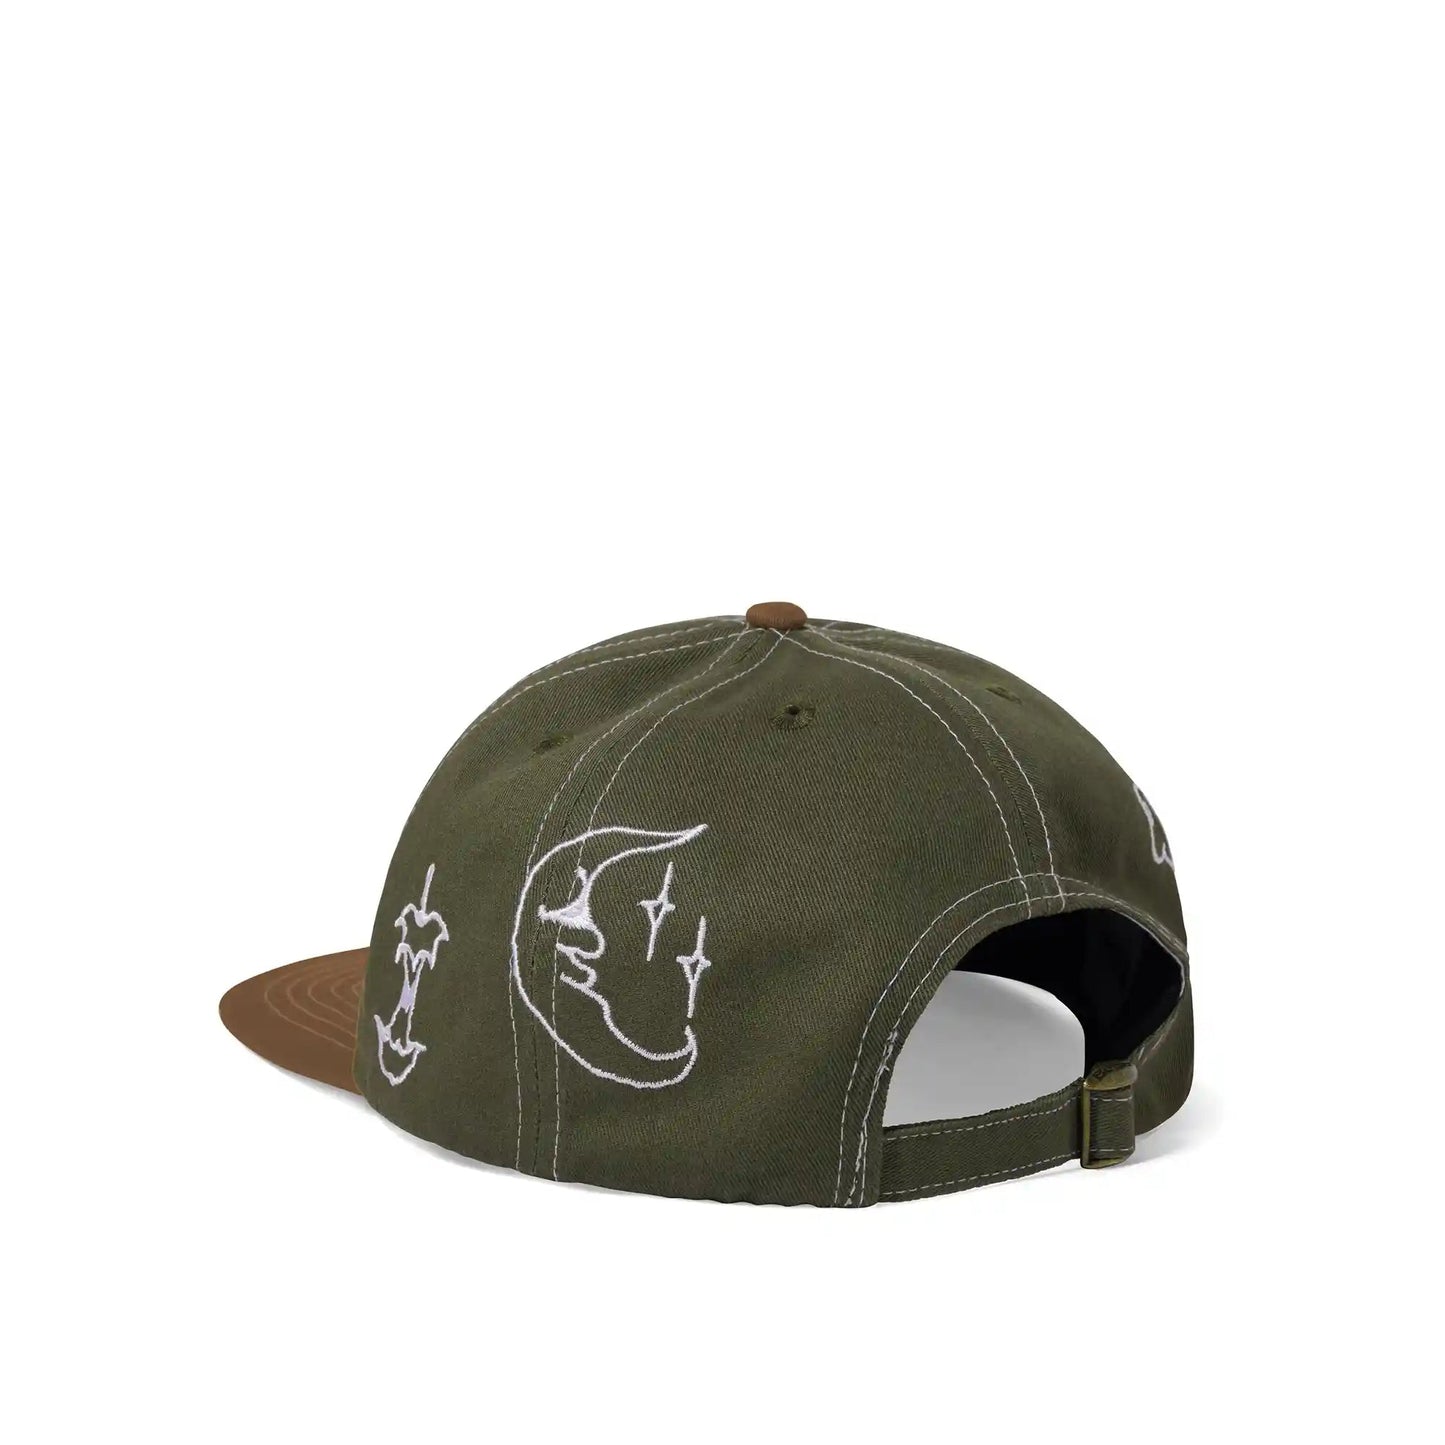 Butter Goods Critter 6 Panel Cap, army / brown - Tiki Room Skateboards - 2